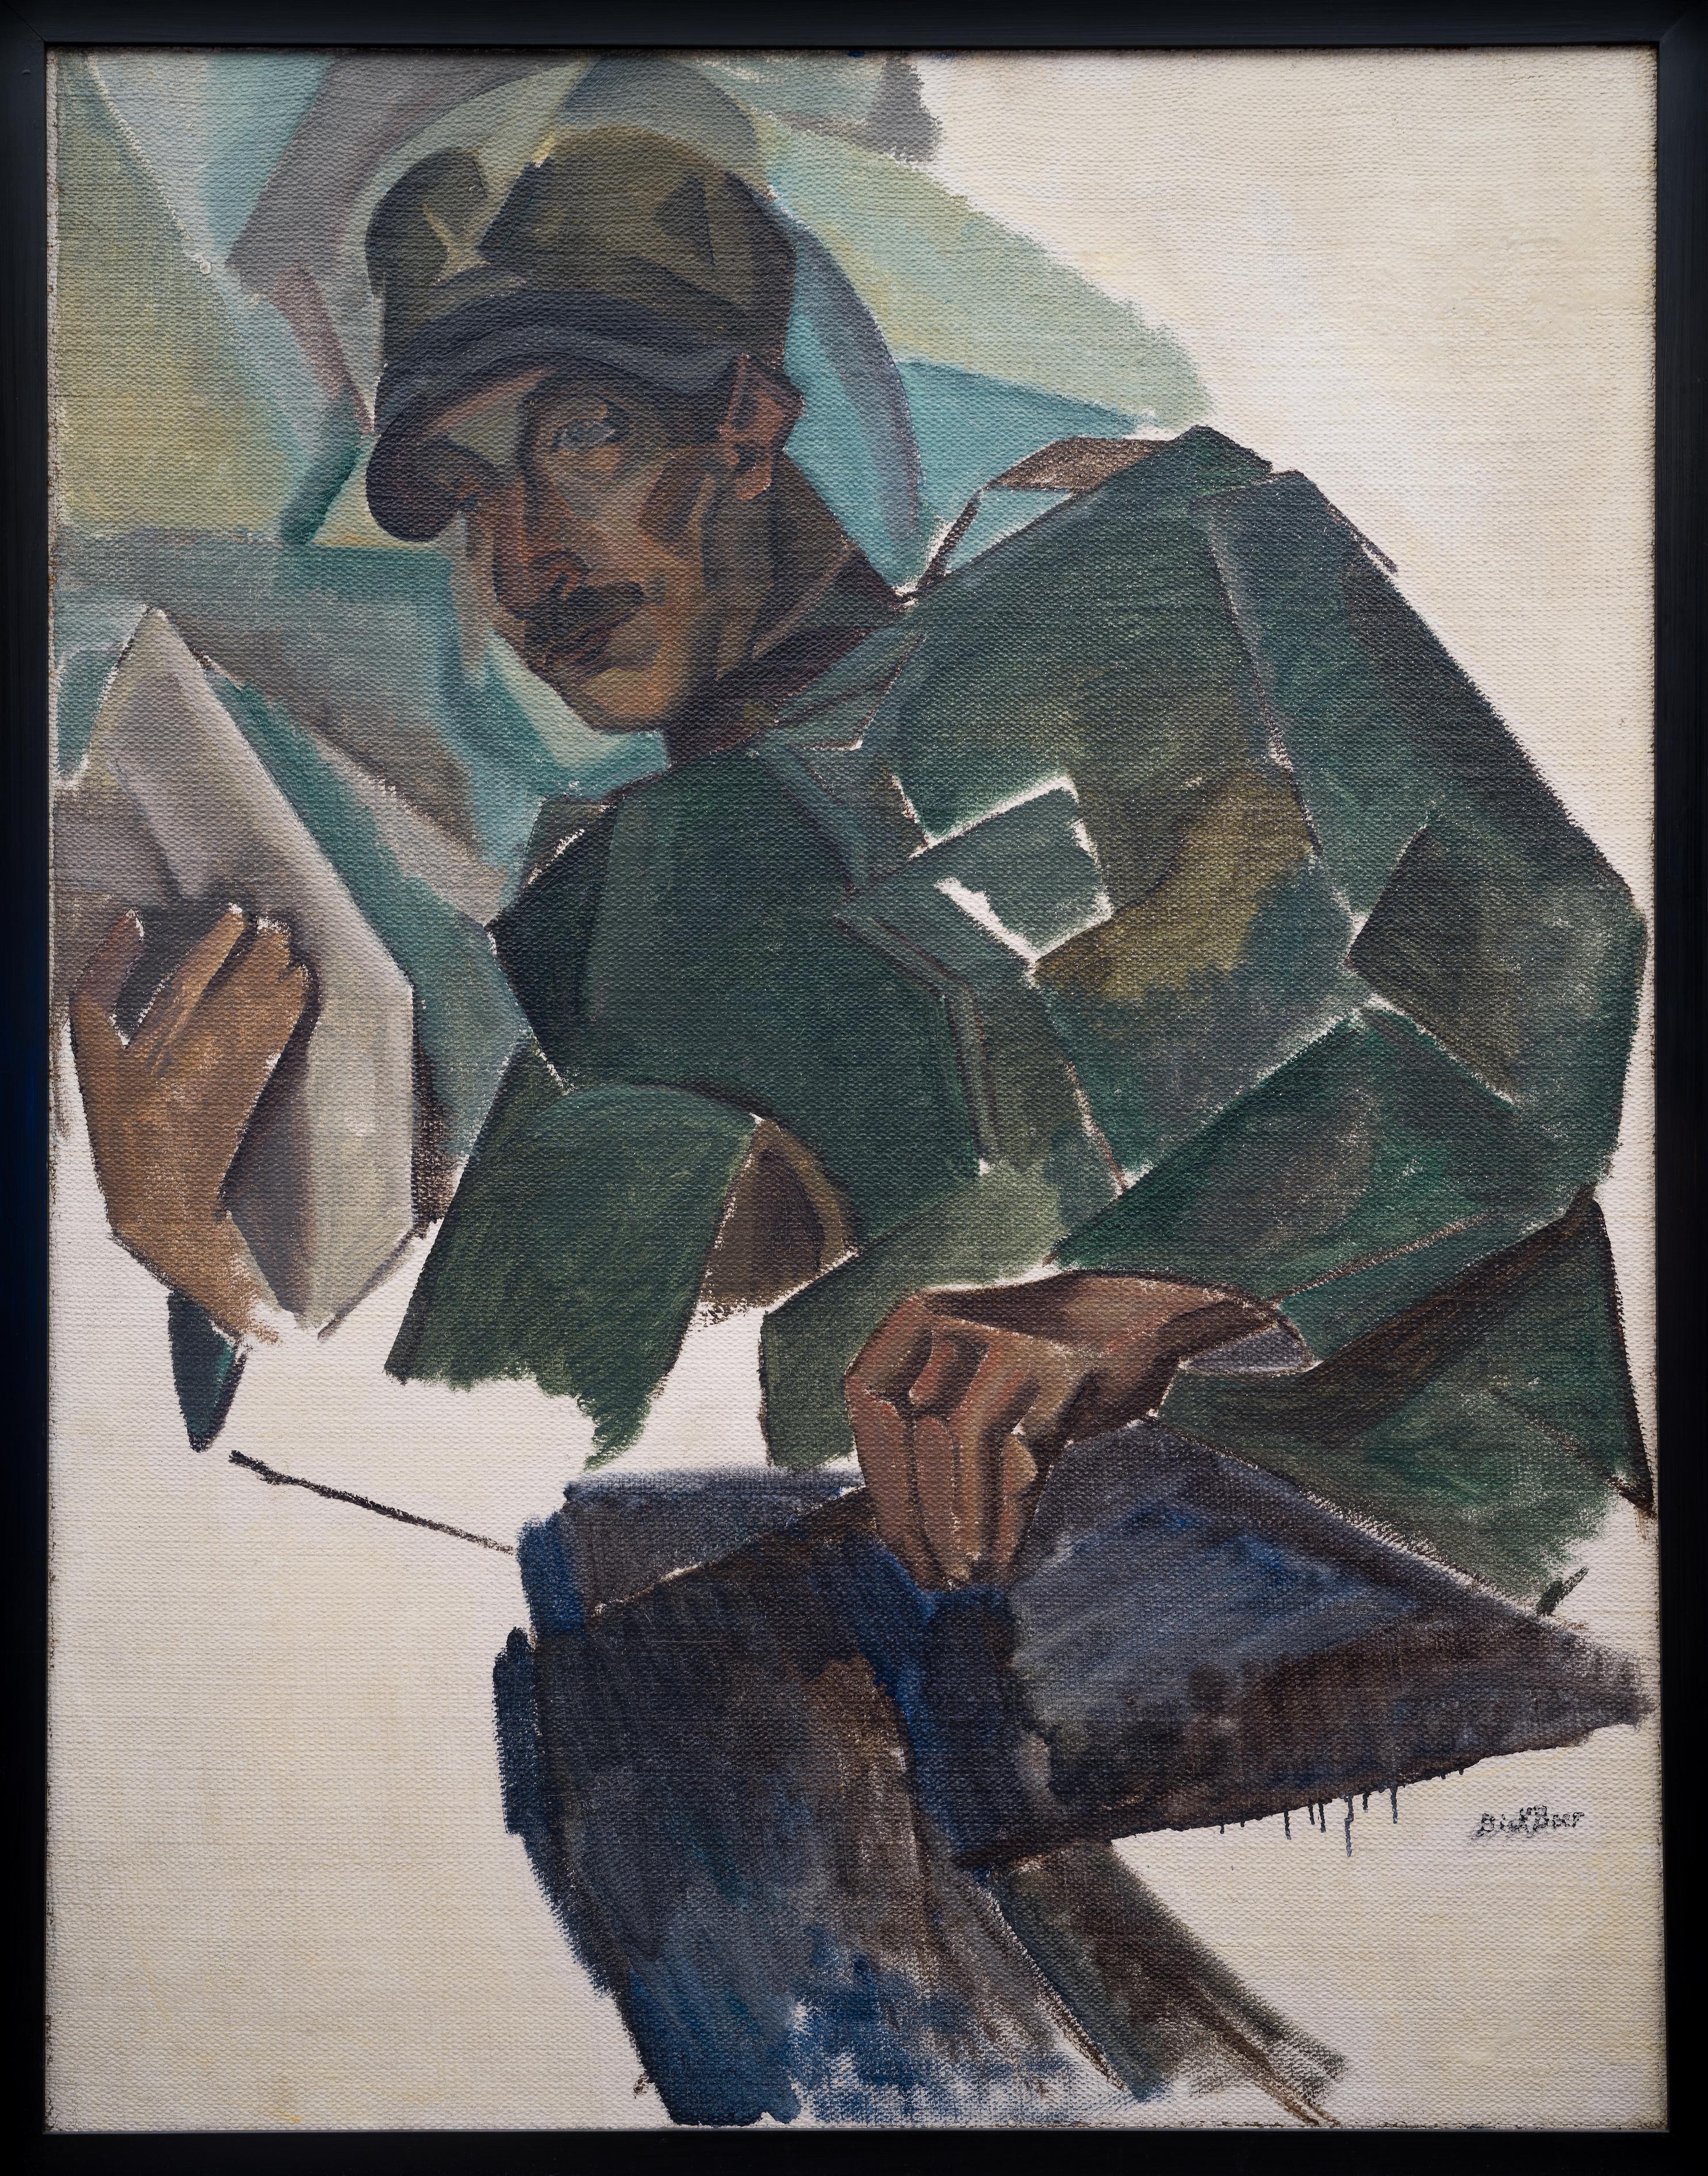 Cubist Portrait of Gabriele Varese (in Italian uniform), 1919 - Painting by Dick Beer